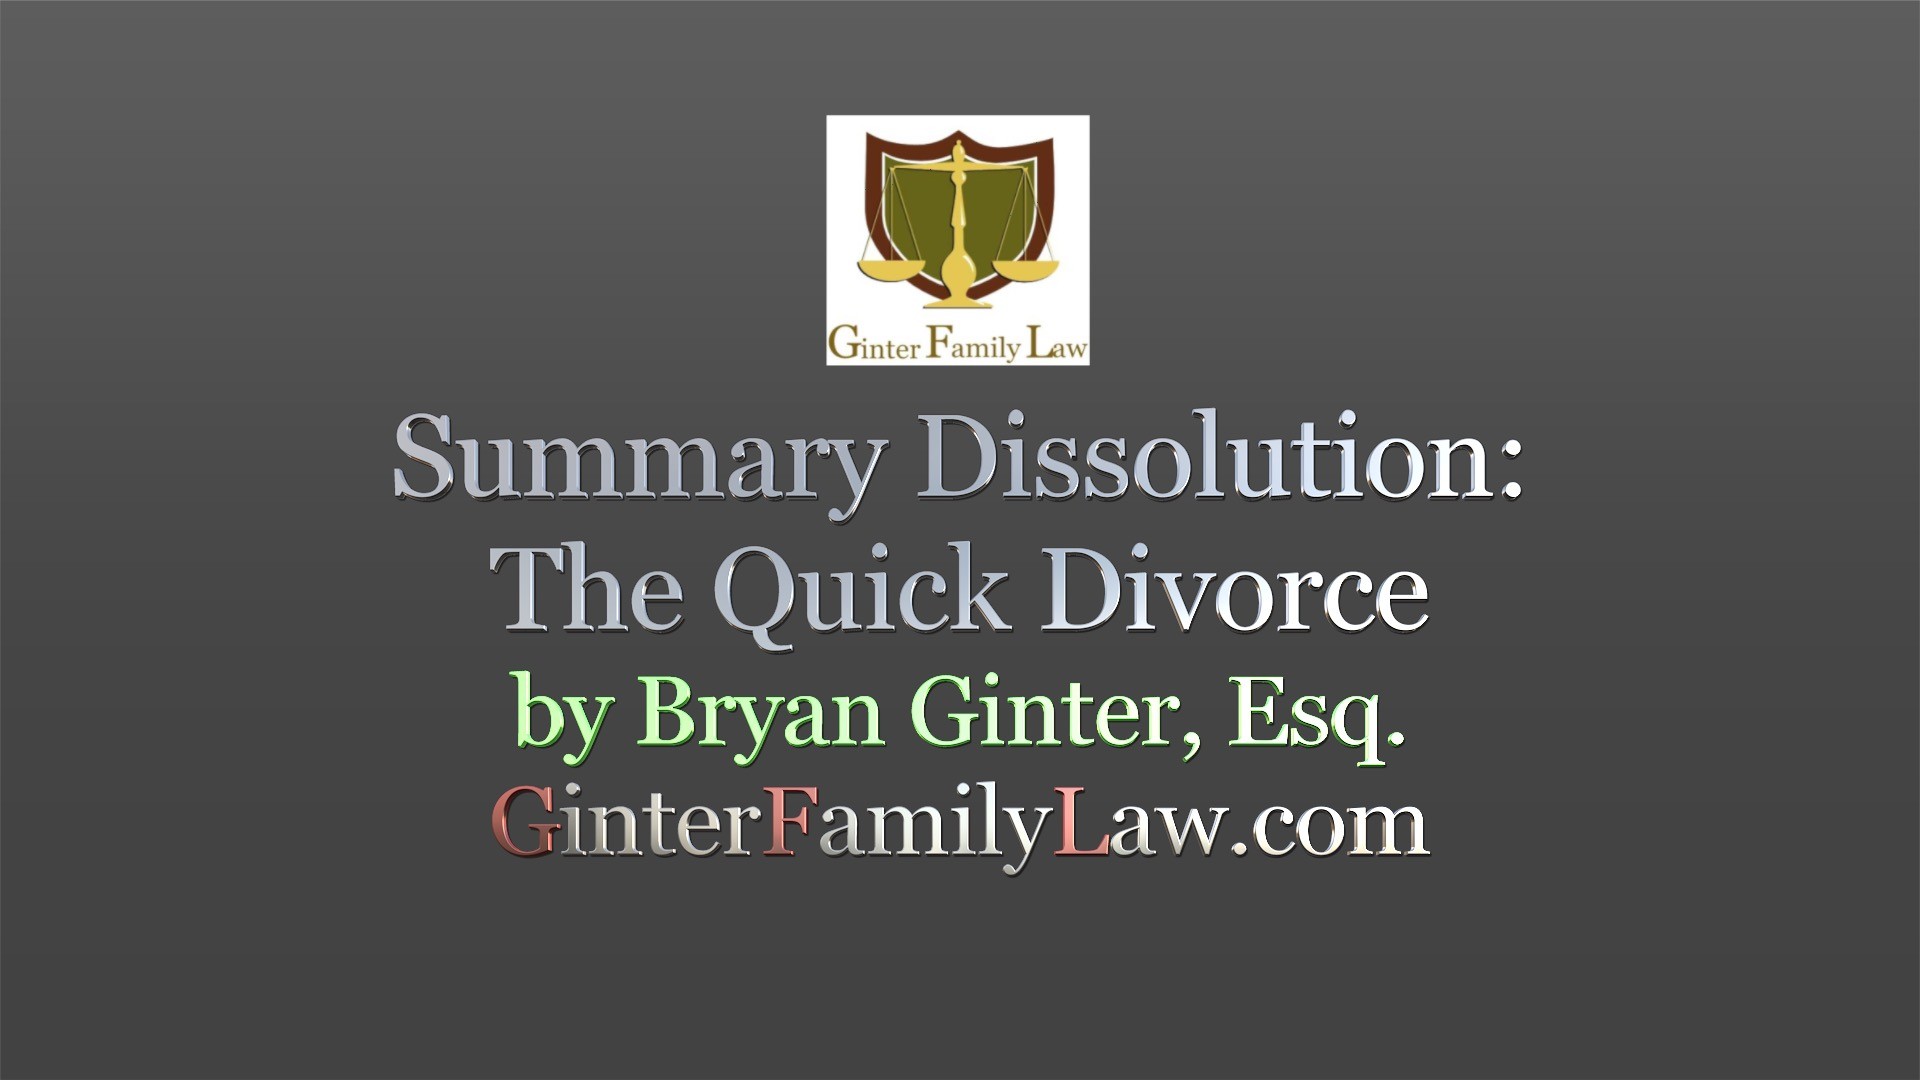 A summary dissolution is a quick and cost-effective way to obtain a divorce in California for eligible cases.